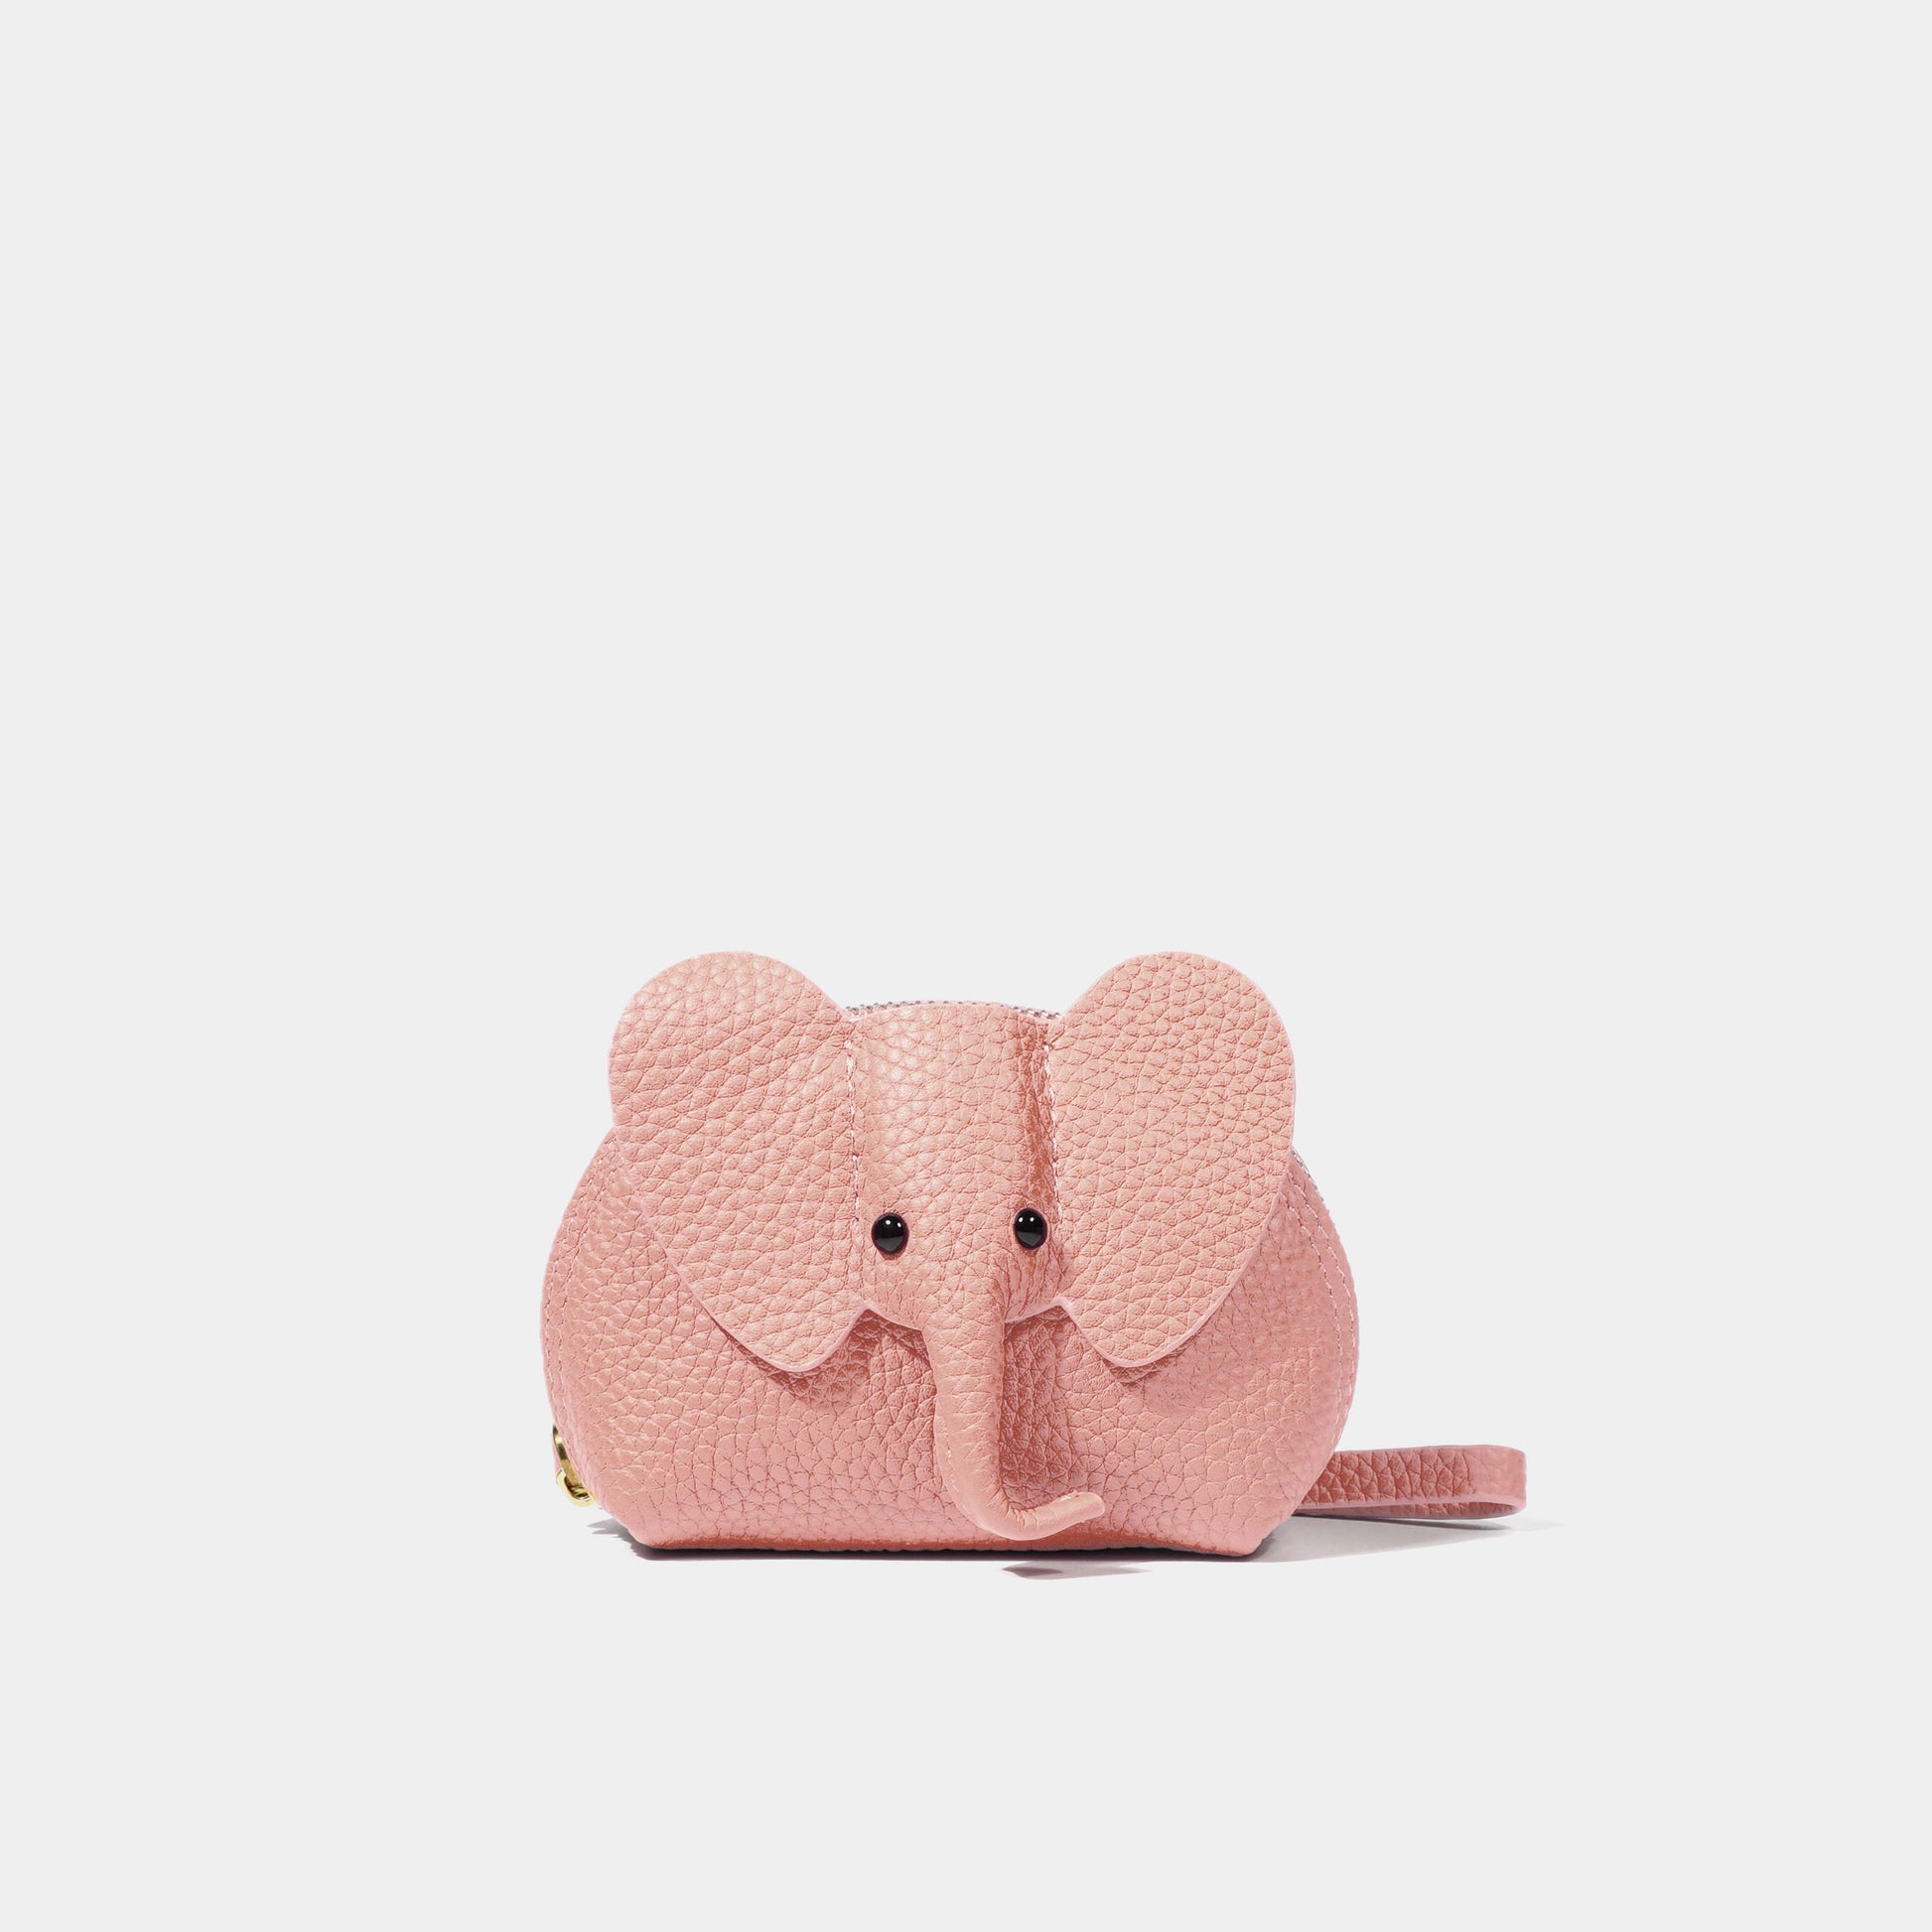 Elephant Leather Coins Purse-Calf Leather Coins Purse-Light Pink